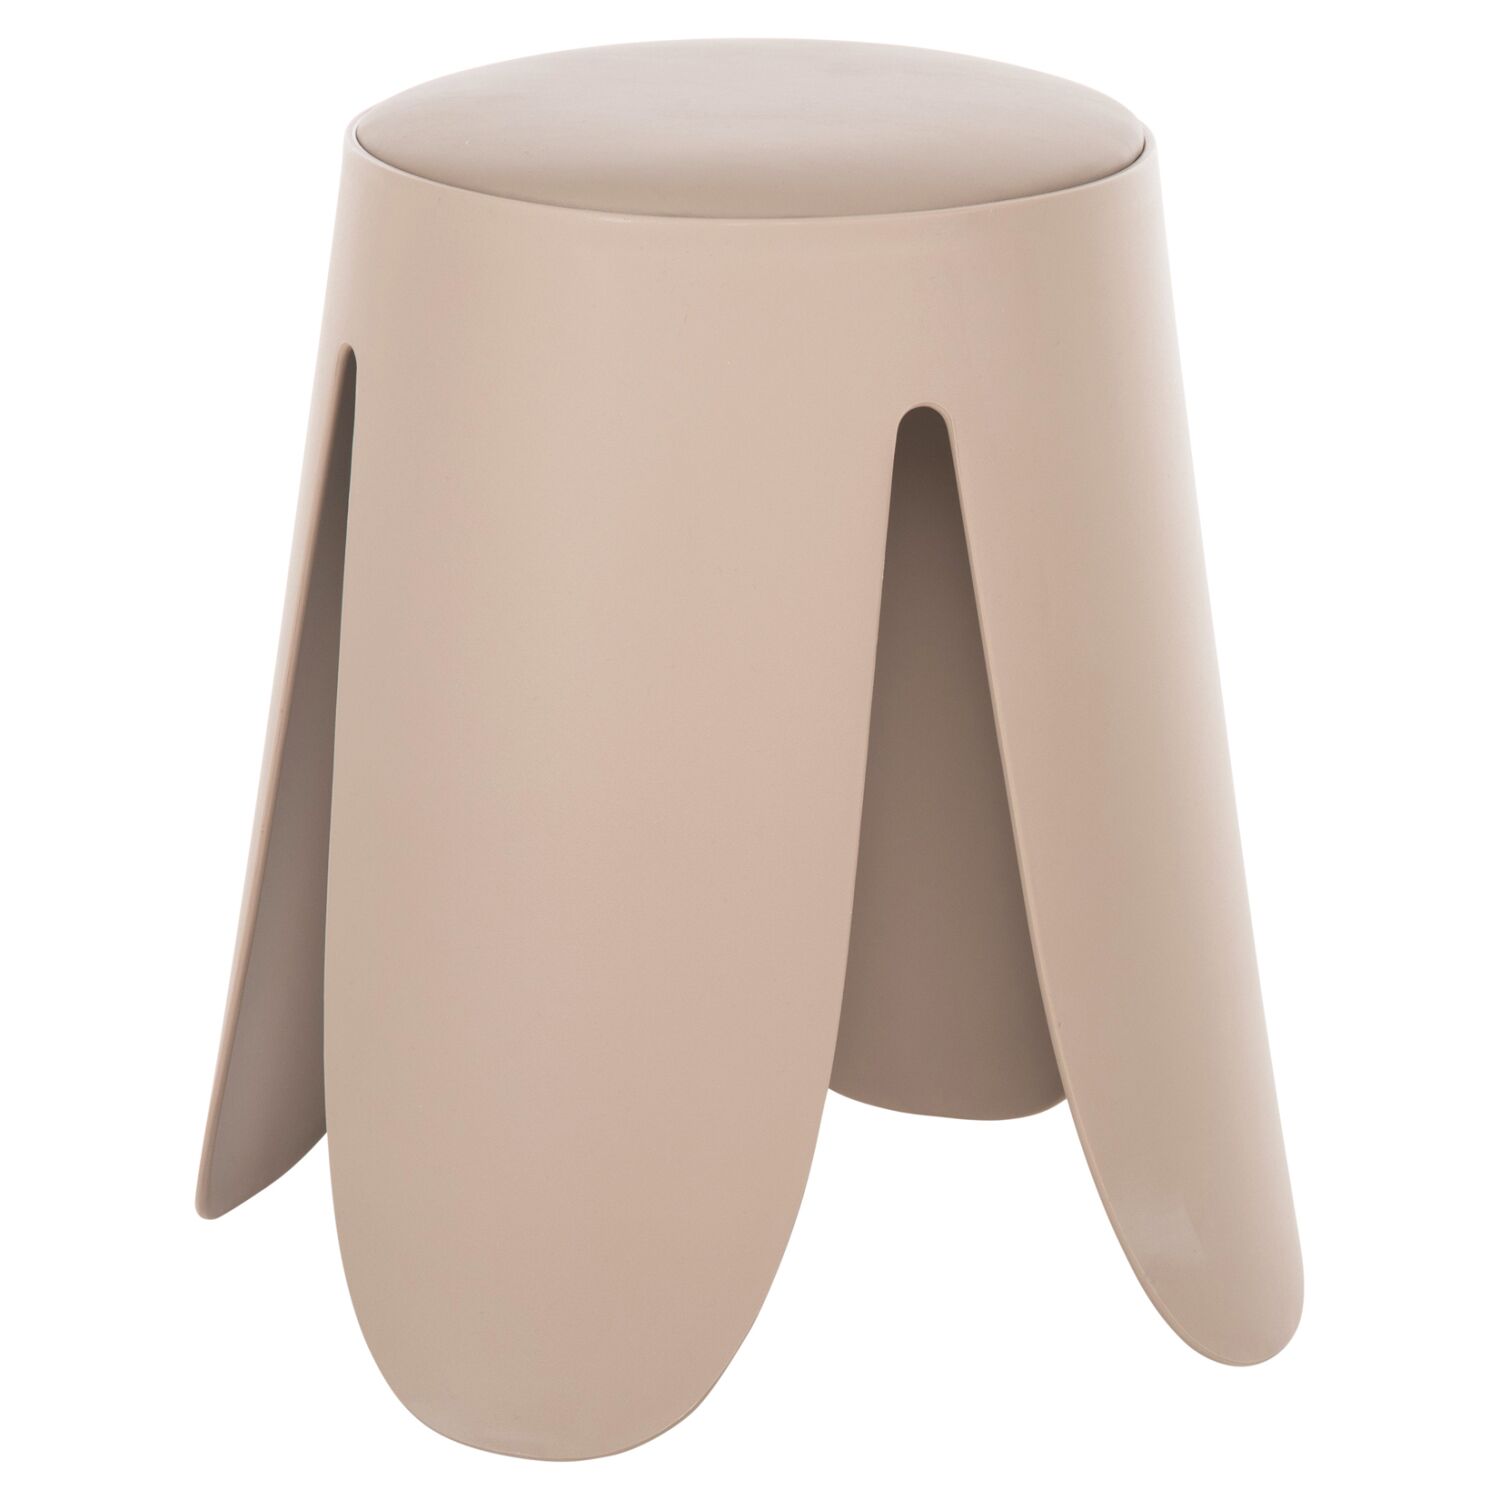 STOOL DENTY HM9619.04 POLYPROPYLENE IN CAPPUCCINO-PU SEAT IN CAPPUCCINO Φ30x47.5Hcm.